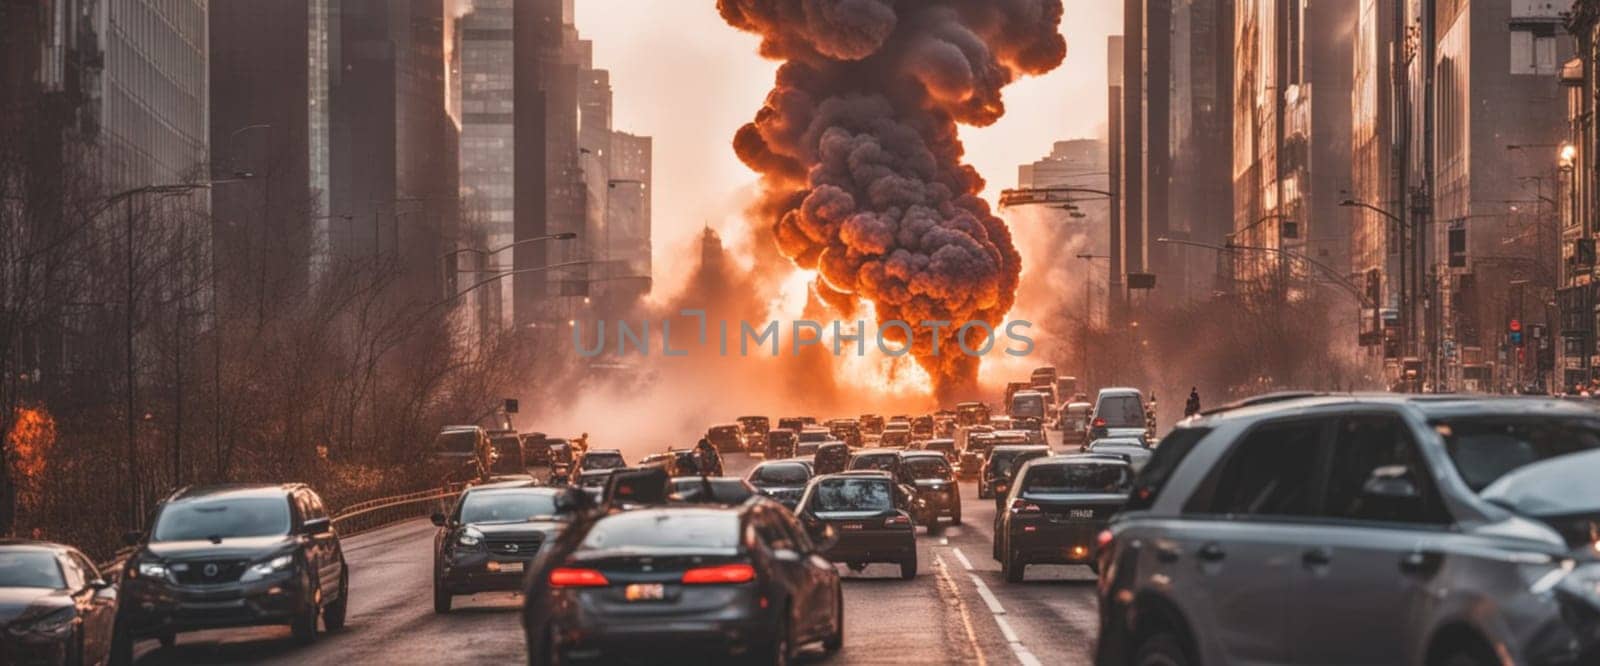 city under attack , explosion, fire, people running, traffic jam, apocalyptic illustration by verbano